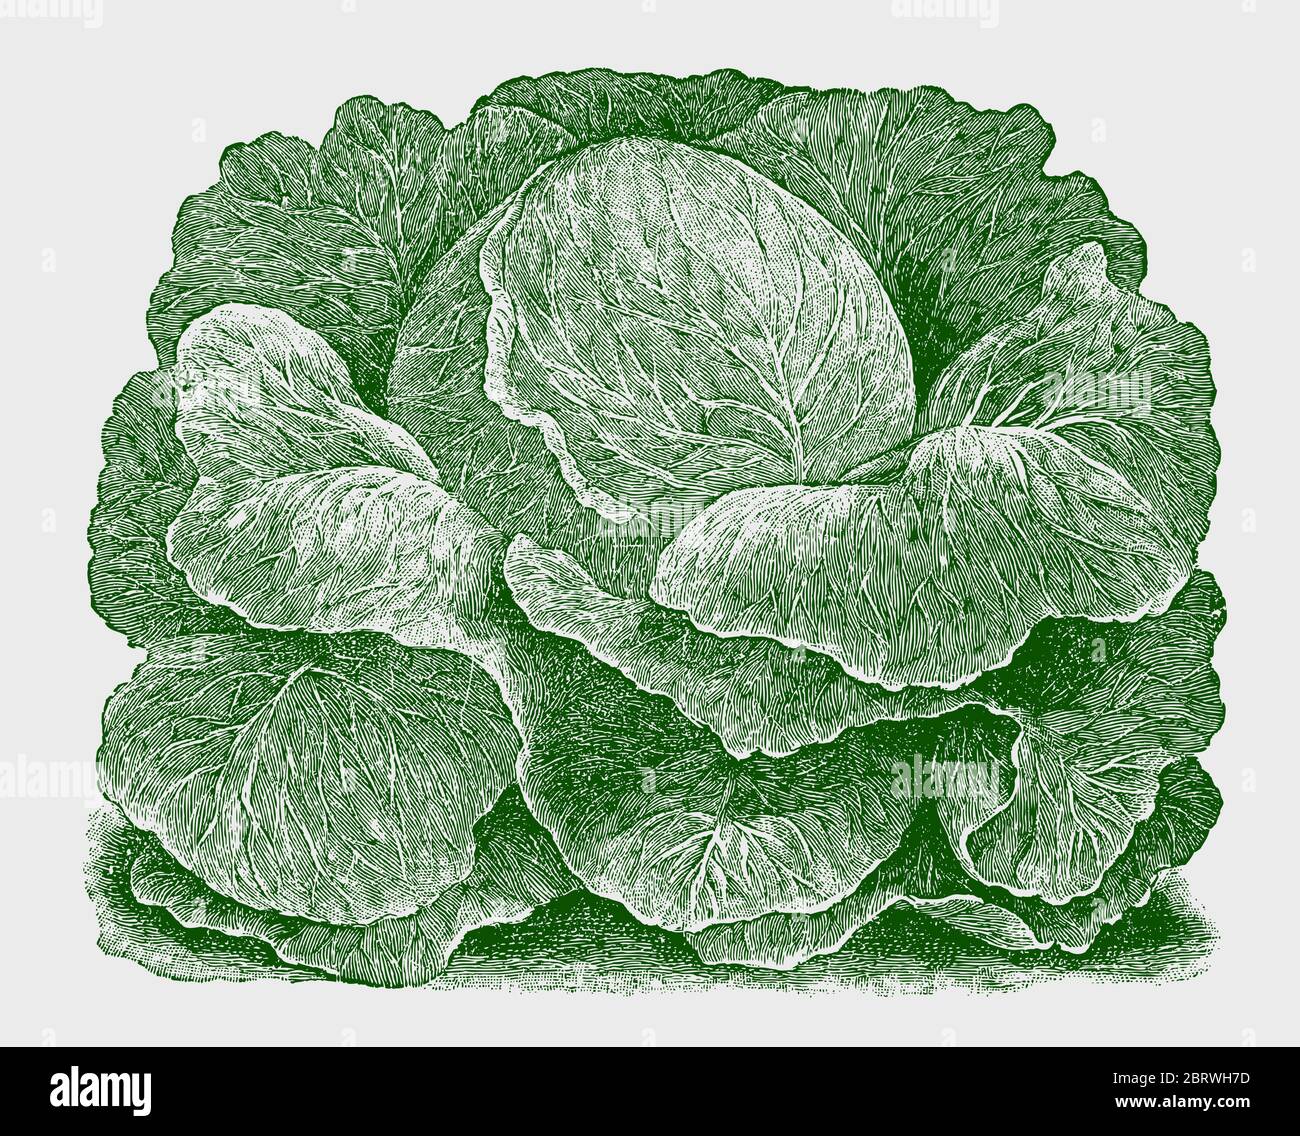 Early round head cabbage variety. Green colored illustration after a historical engraving from the early 20th century Stock Vector